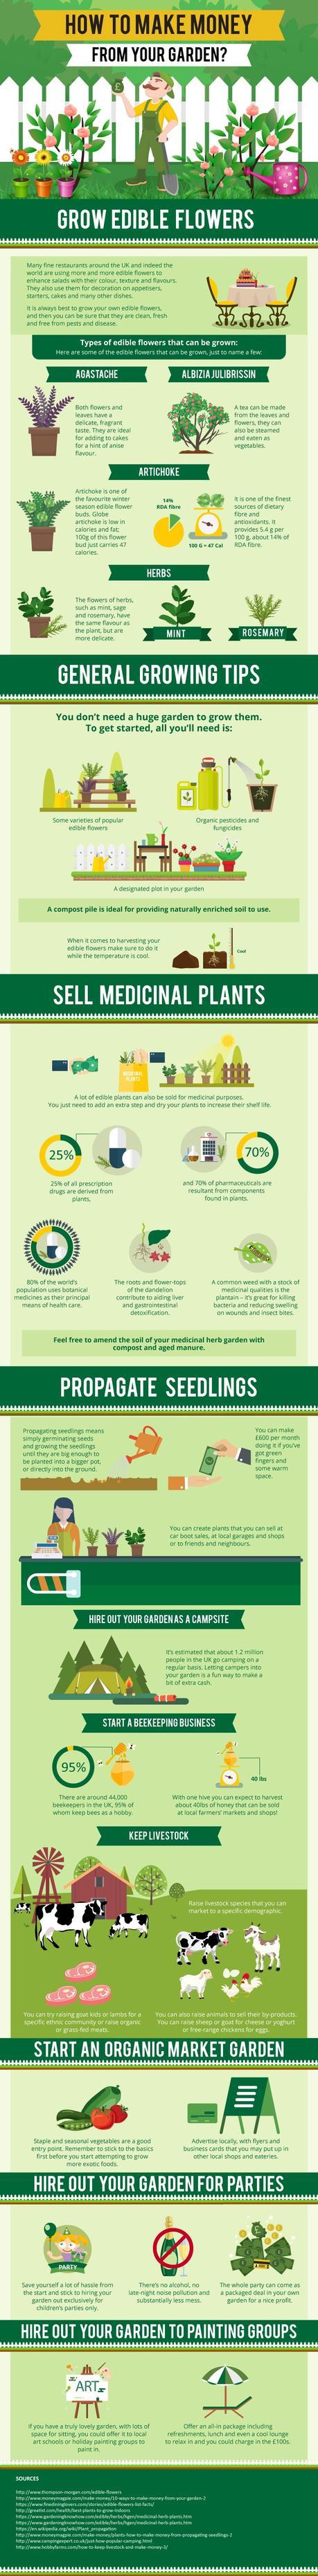 How to make money from your garden - Infographic